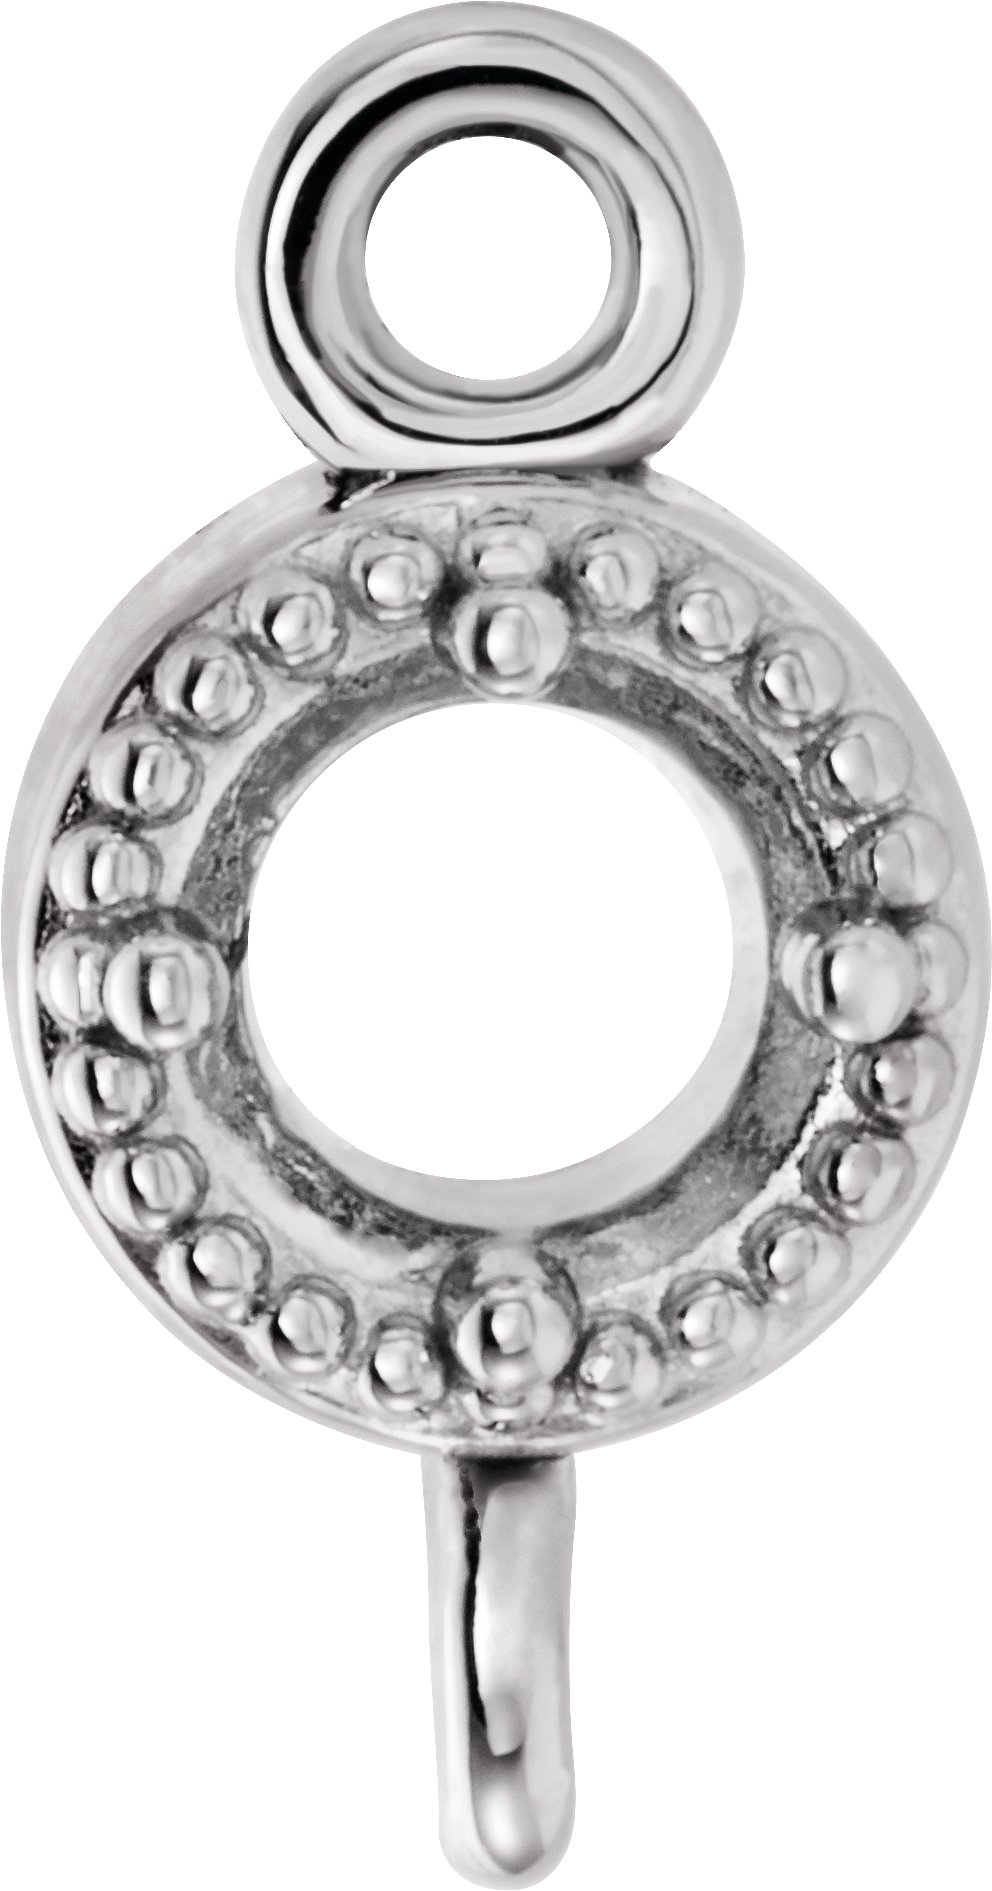 29623 / Unset / Sterling Silver / 2.5 Mm / Semi-Polished / .06 Ct Micro Bezel Link With Milgrain Border